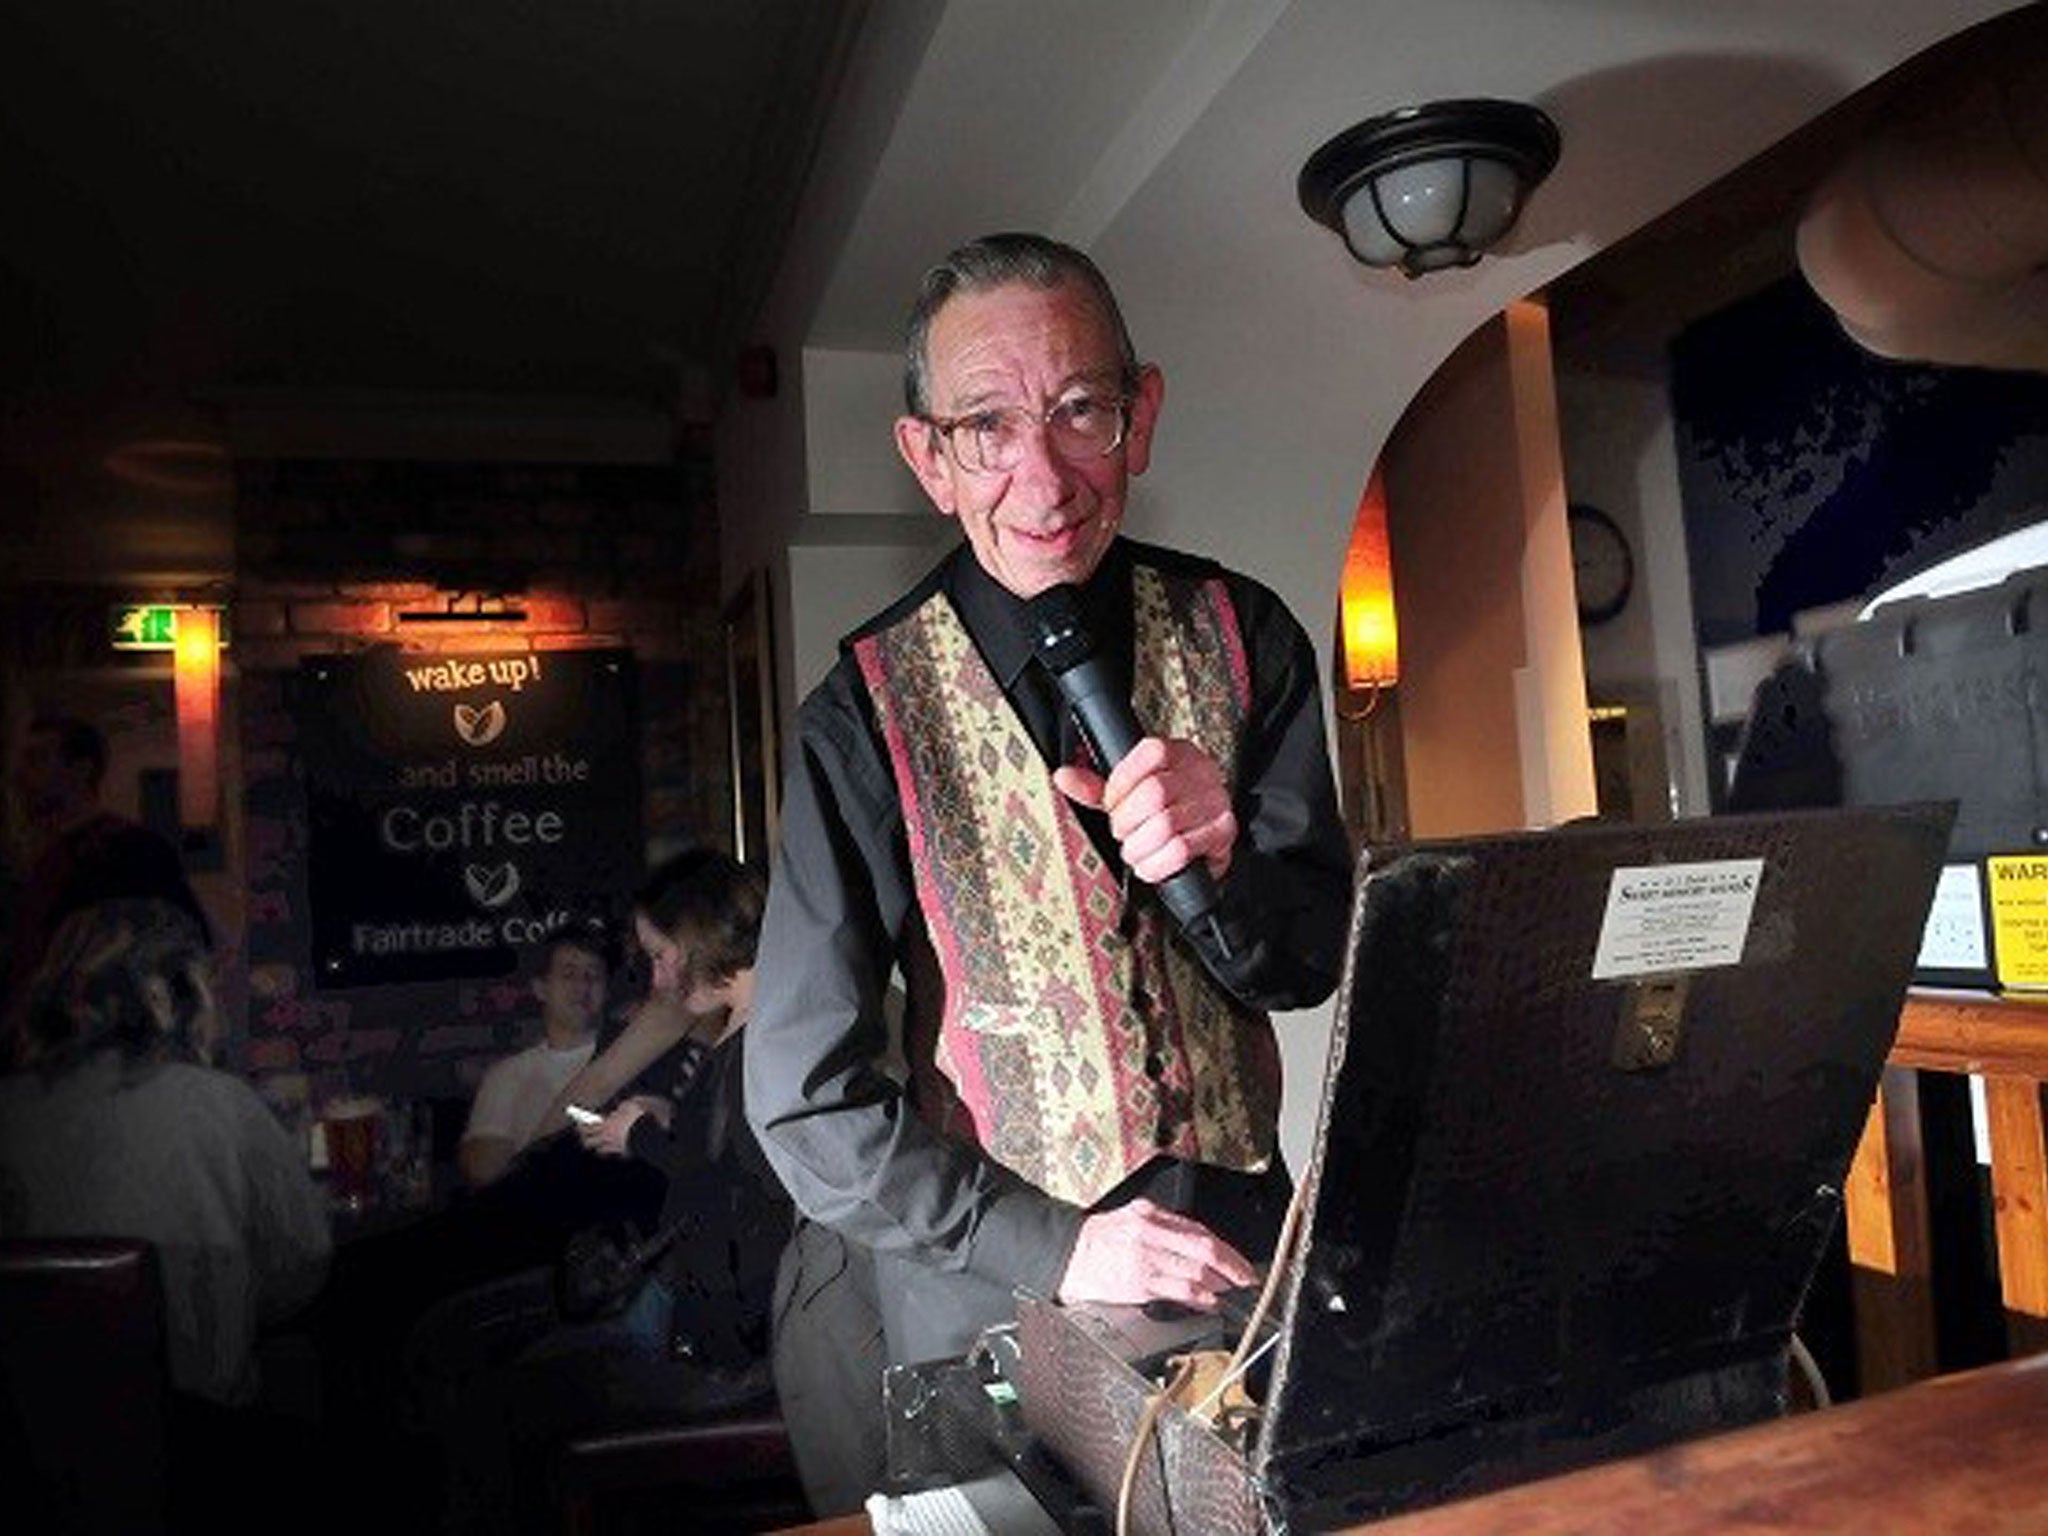 DJ Derek went missing in the early hours of Saturday 11 July